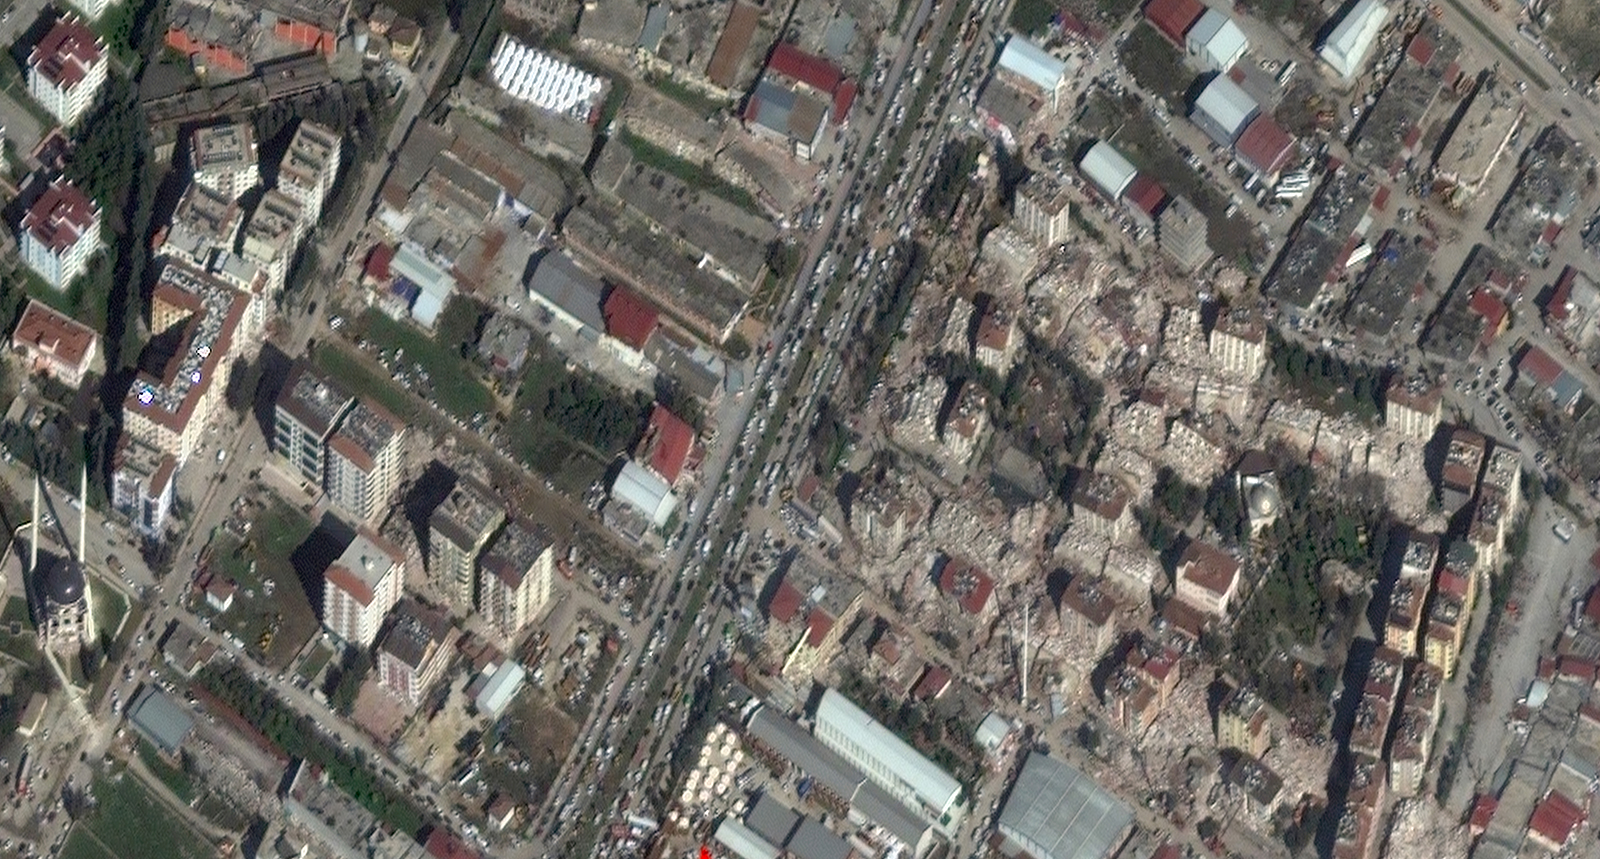 A satellite image shows buildings damaged after an earthquake in Antakya, Turkey.